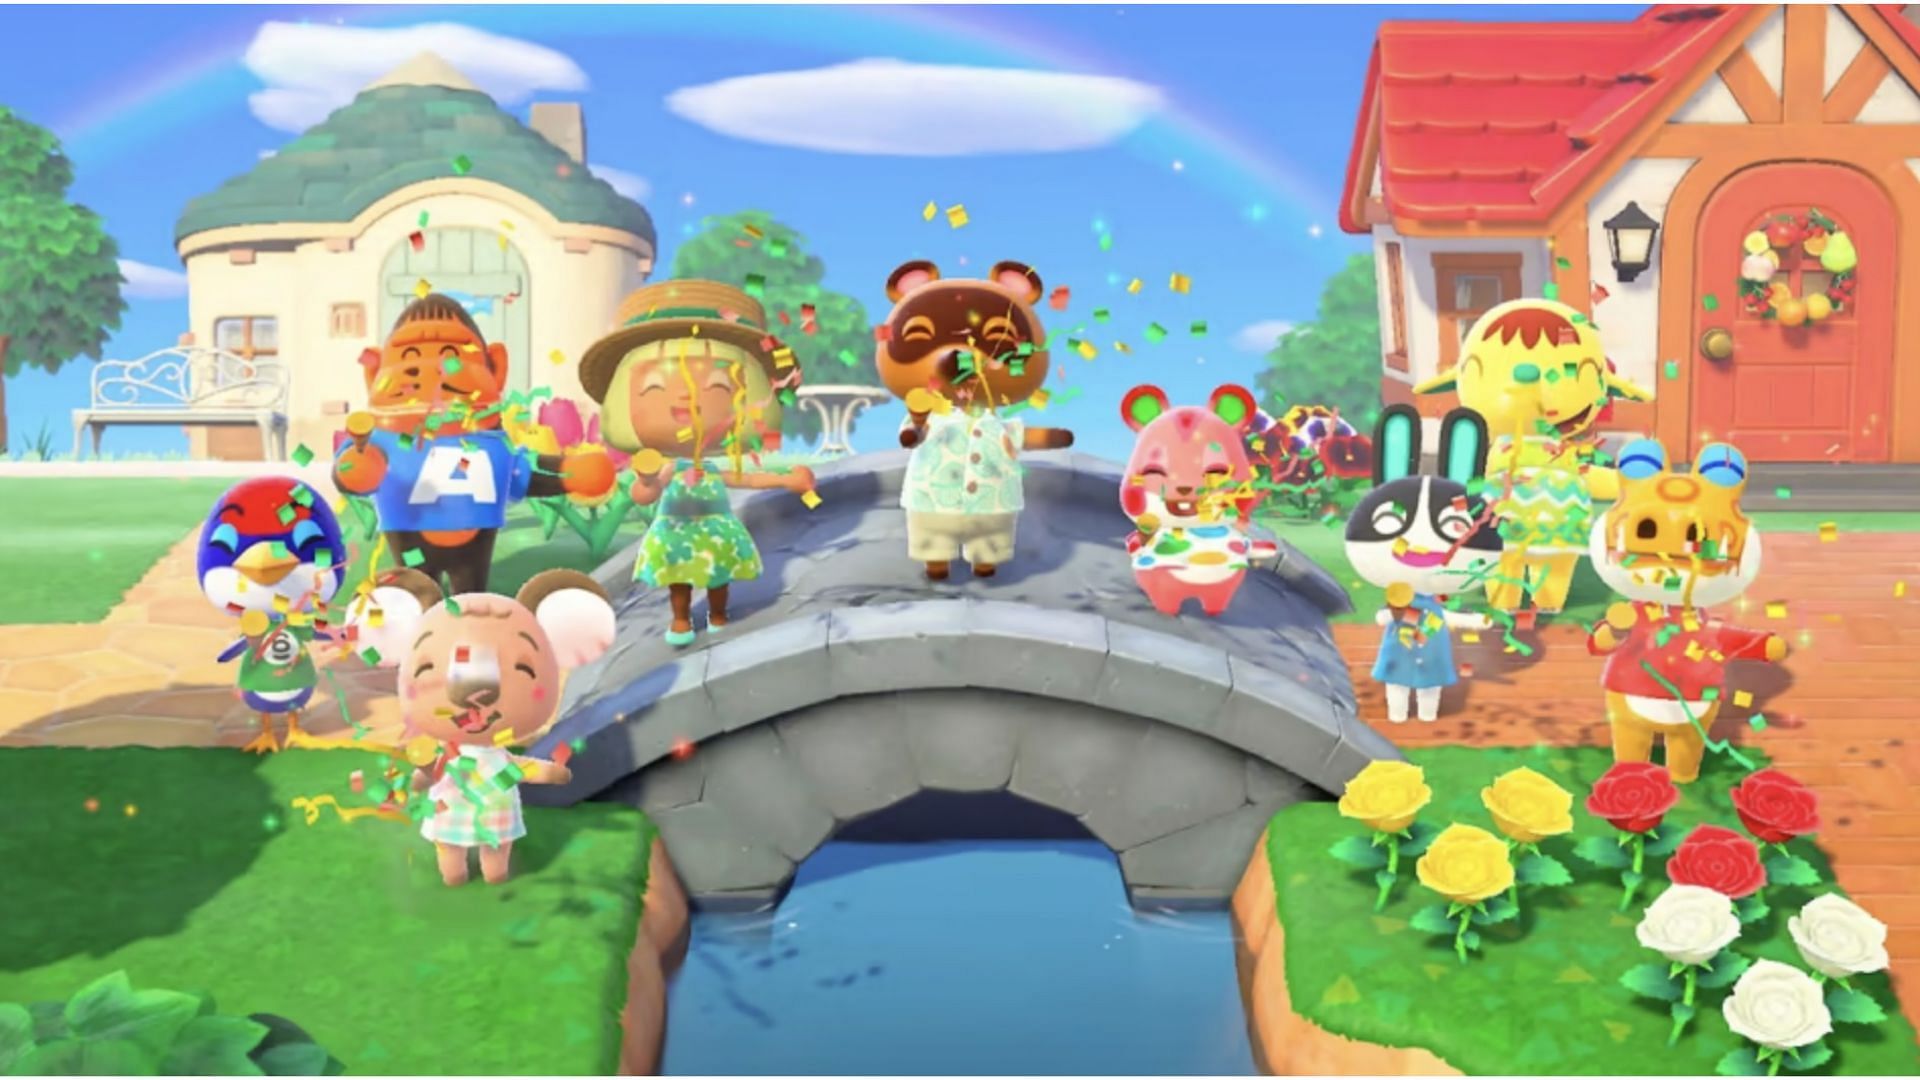 Animal Crossing: New Horizons has a series of events lined up for its players in 2022 (Image via Animal Crossing World)